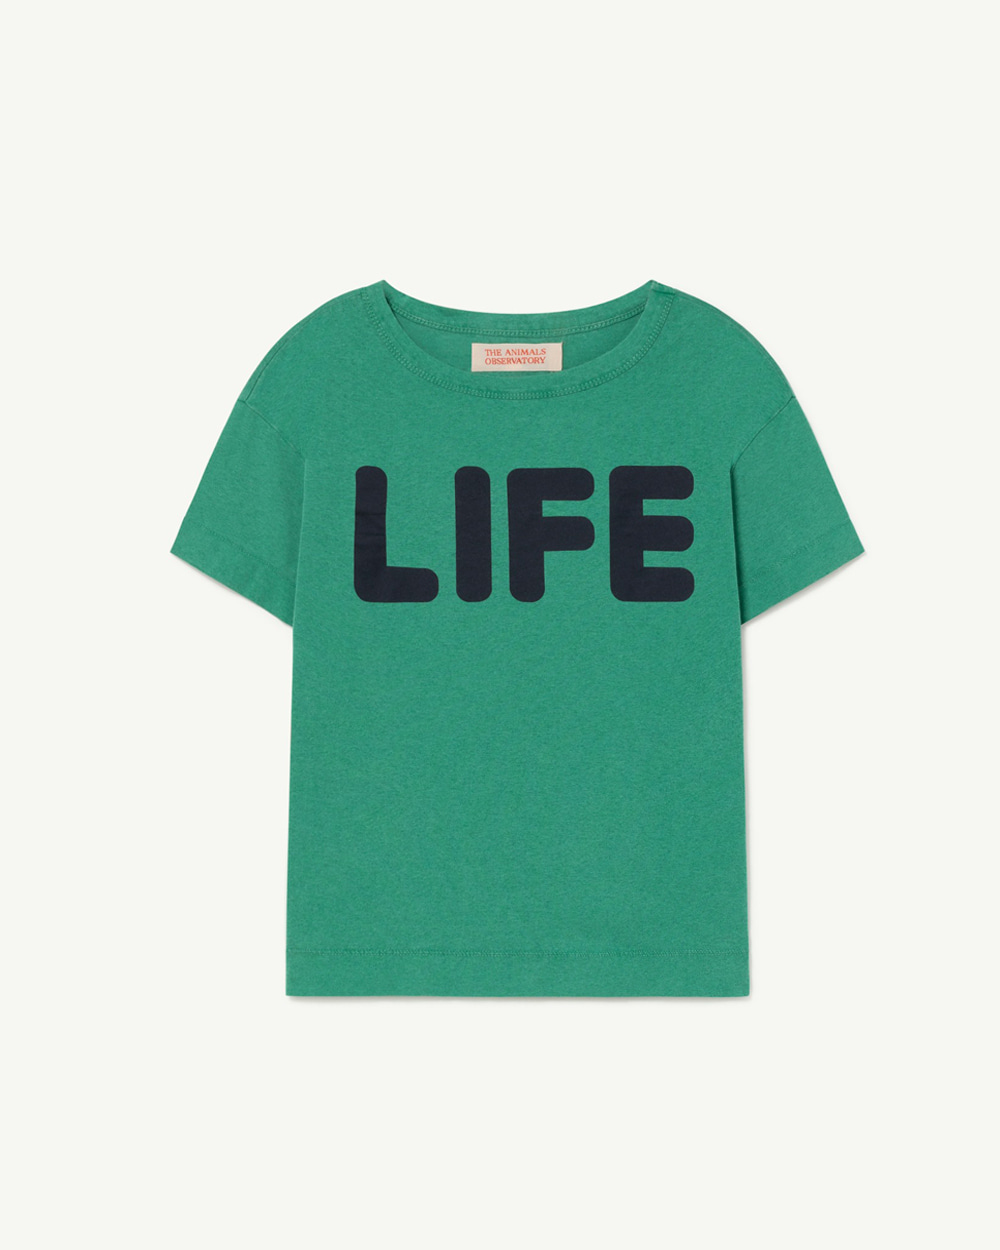 [TAO] F22001-206_EG /ROOSTER KIDS+ T-SHIRT Green_Life [3Y,4Y]